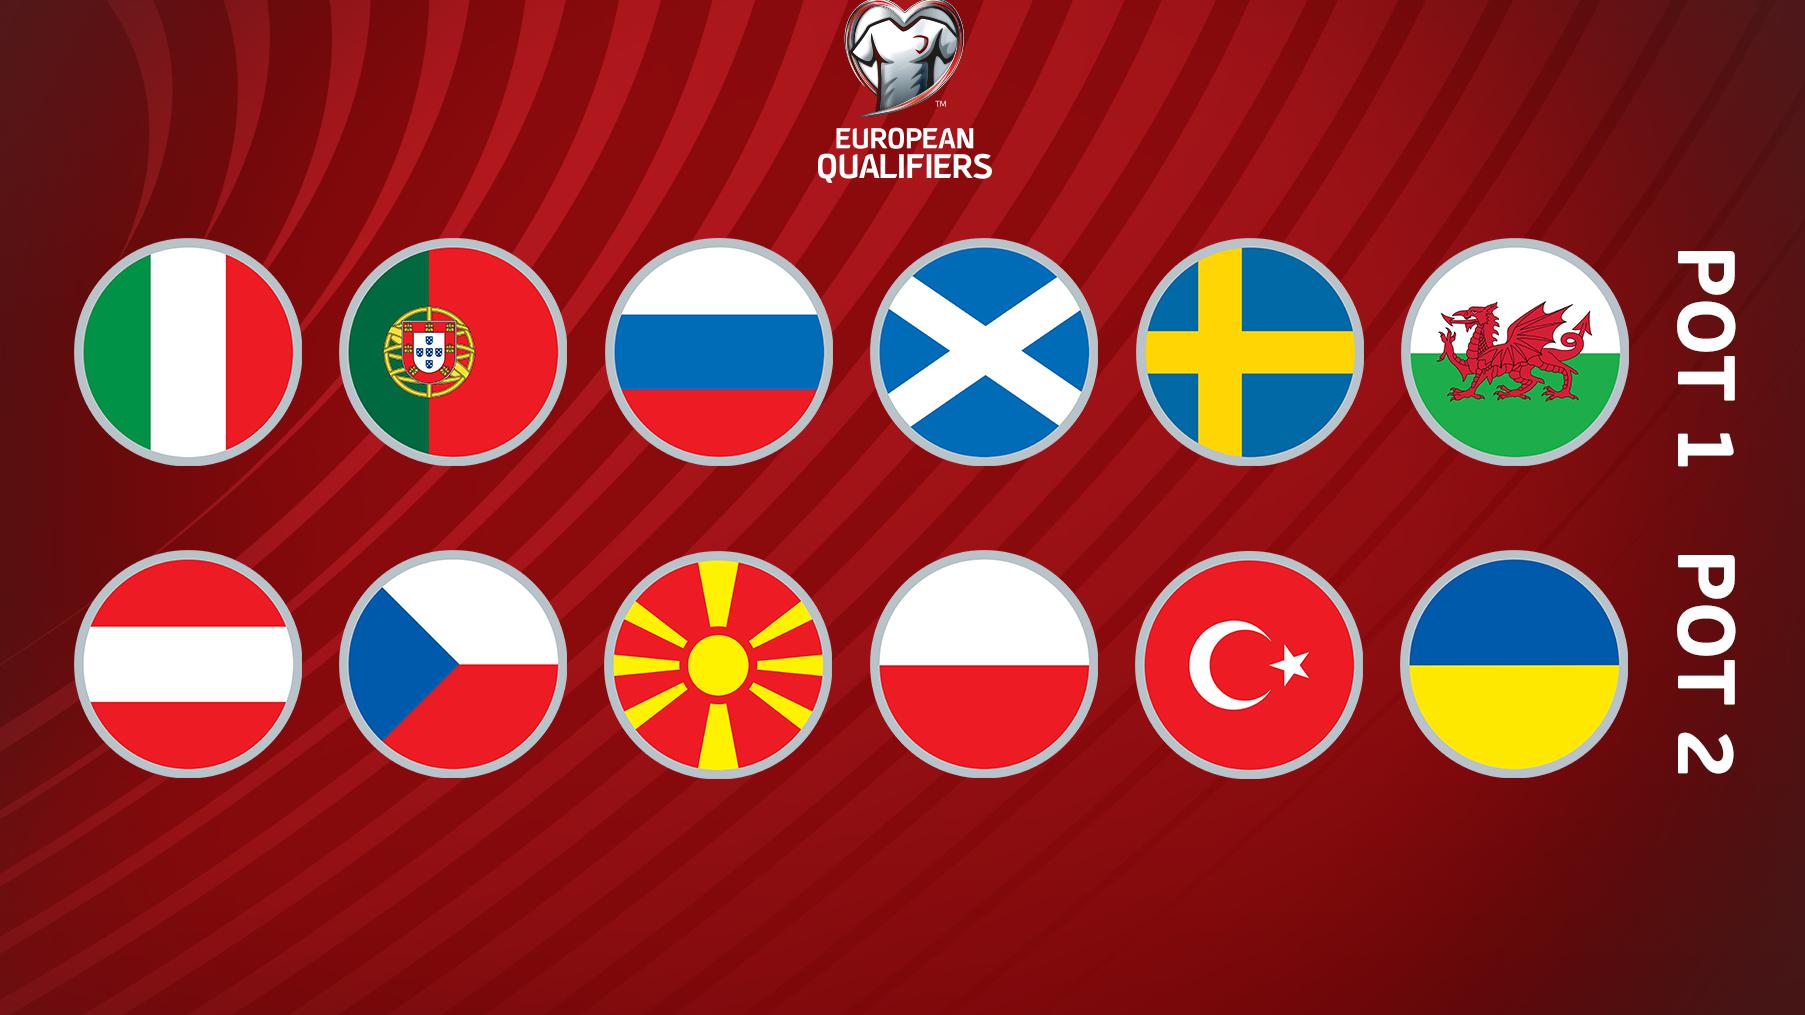 Playoff world cup 2022 europe